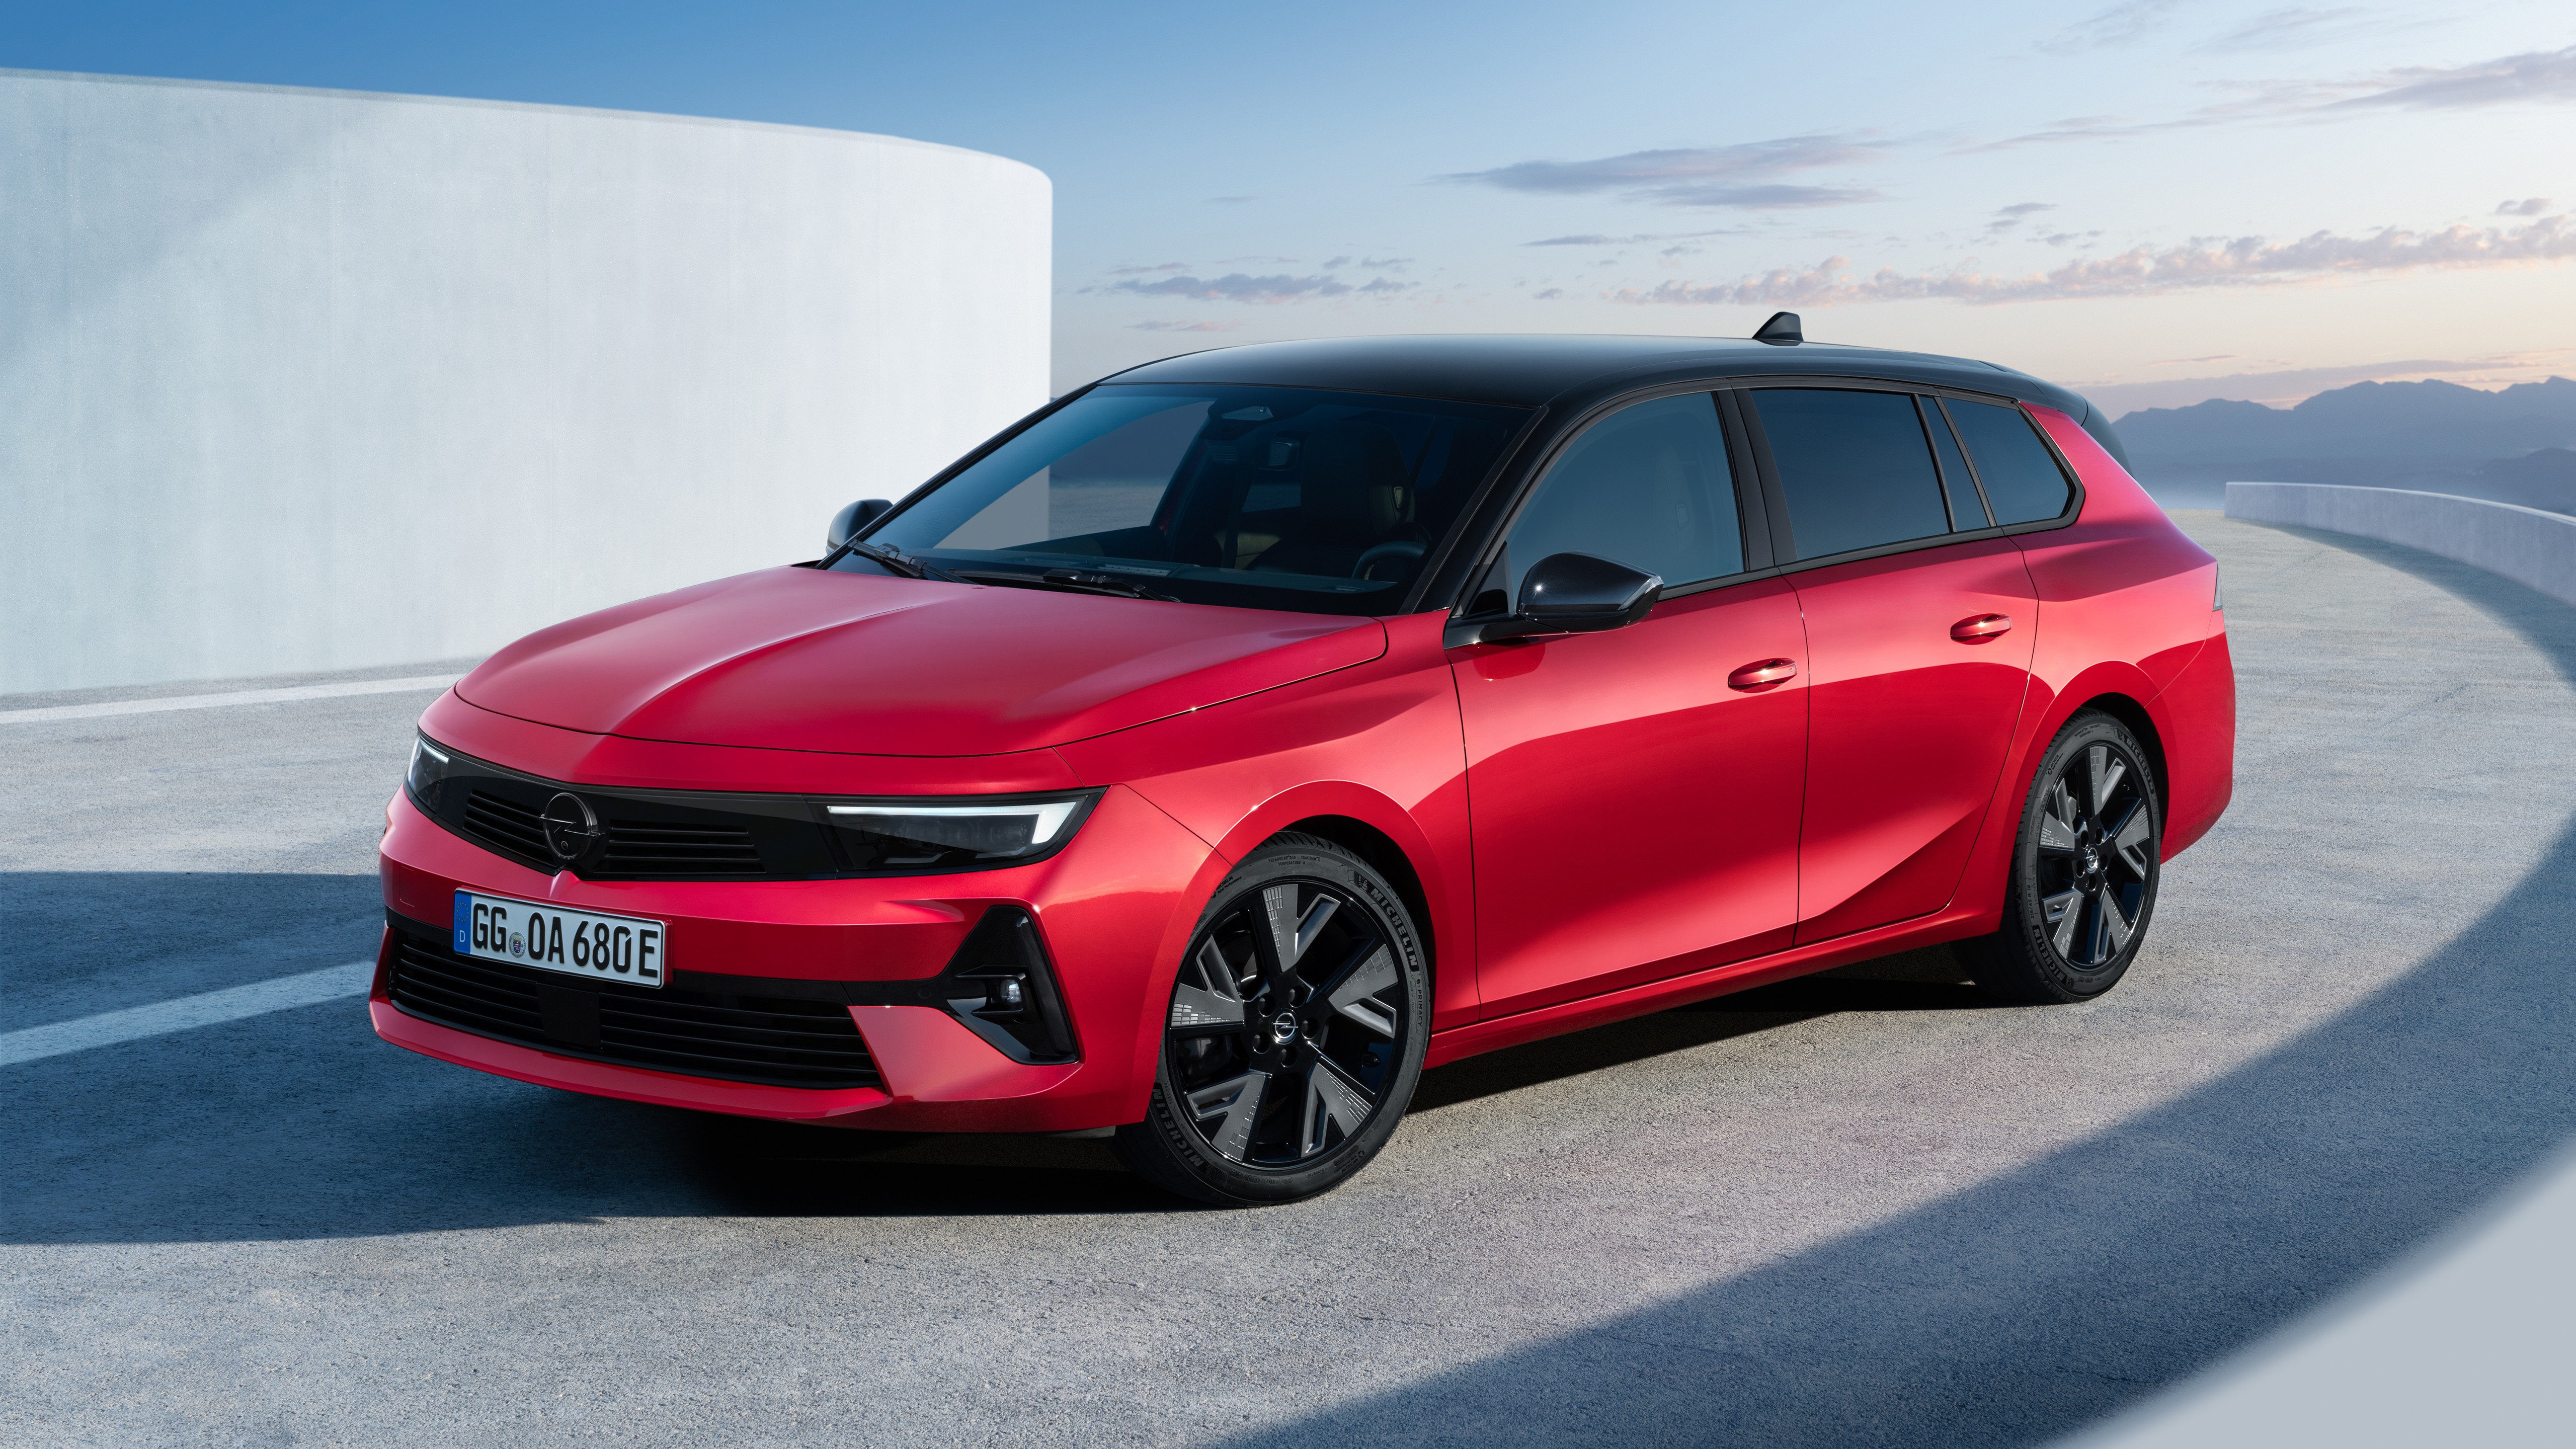 New Opel Astra is “German Compact Car of the Year 2023”, Opel